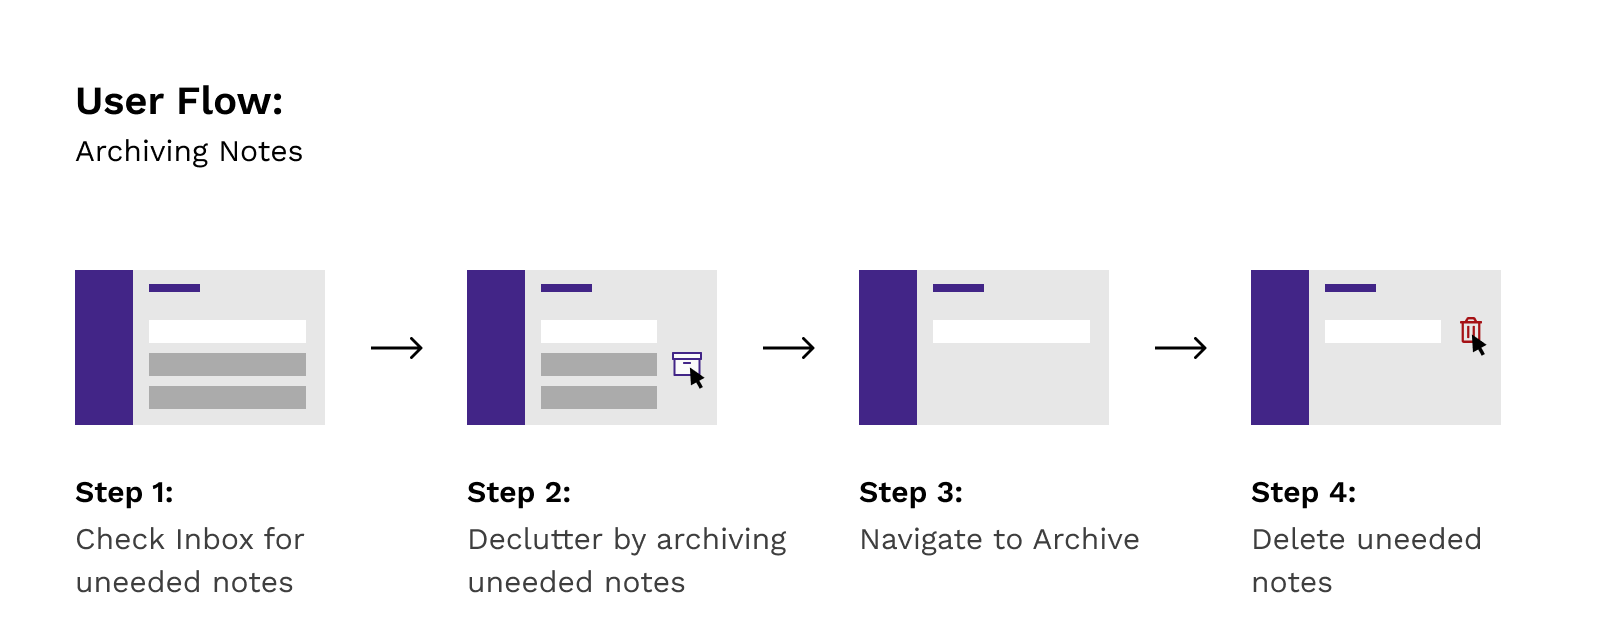 User Flow - Archiving Notes